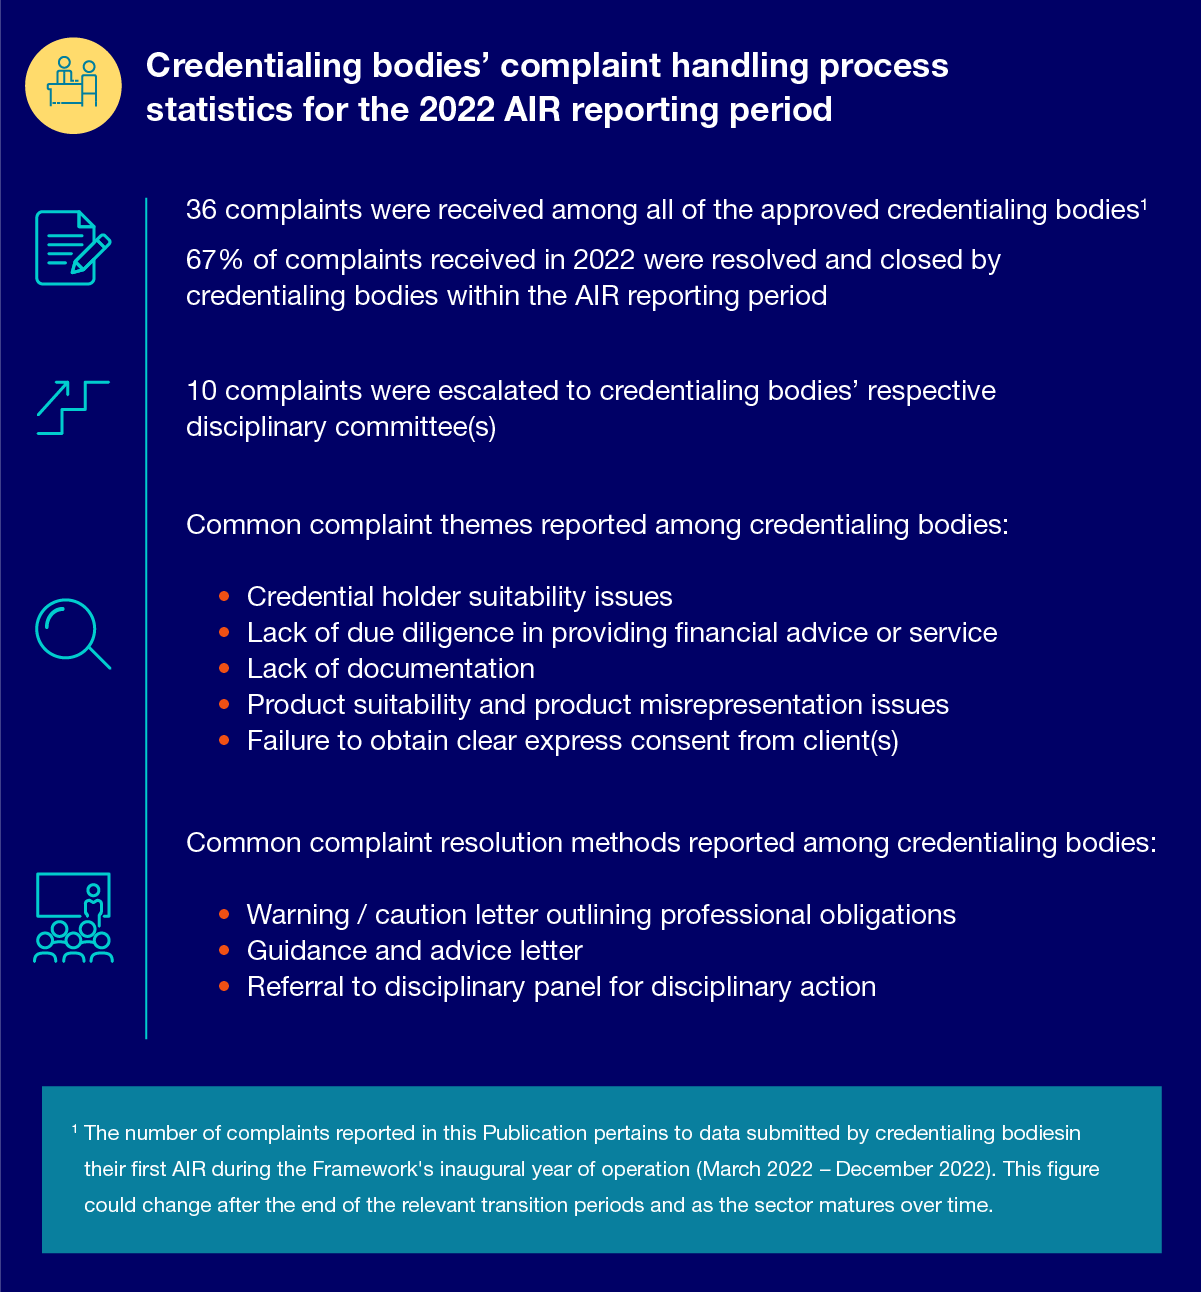 Credentialing bodies’ complaint handling process statistics for the 2022 AIR reporting period